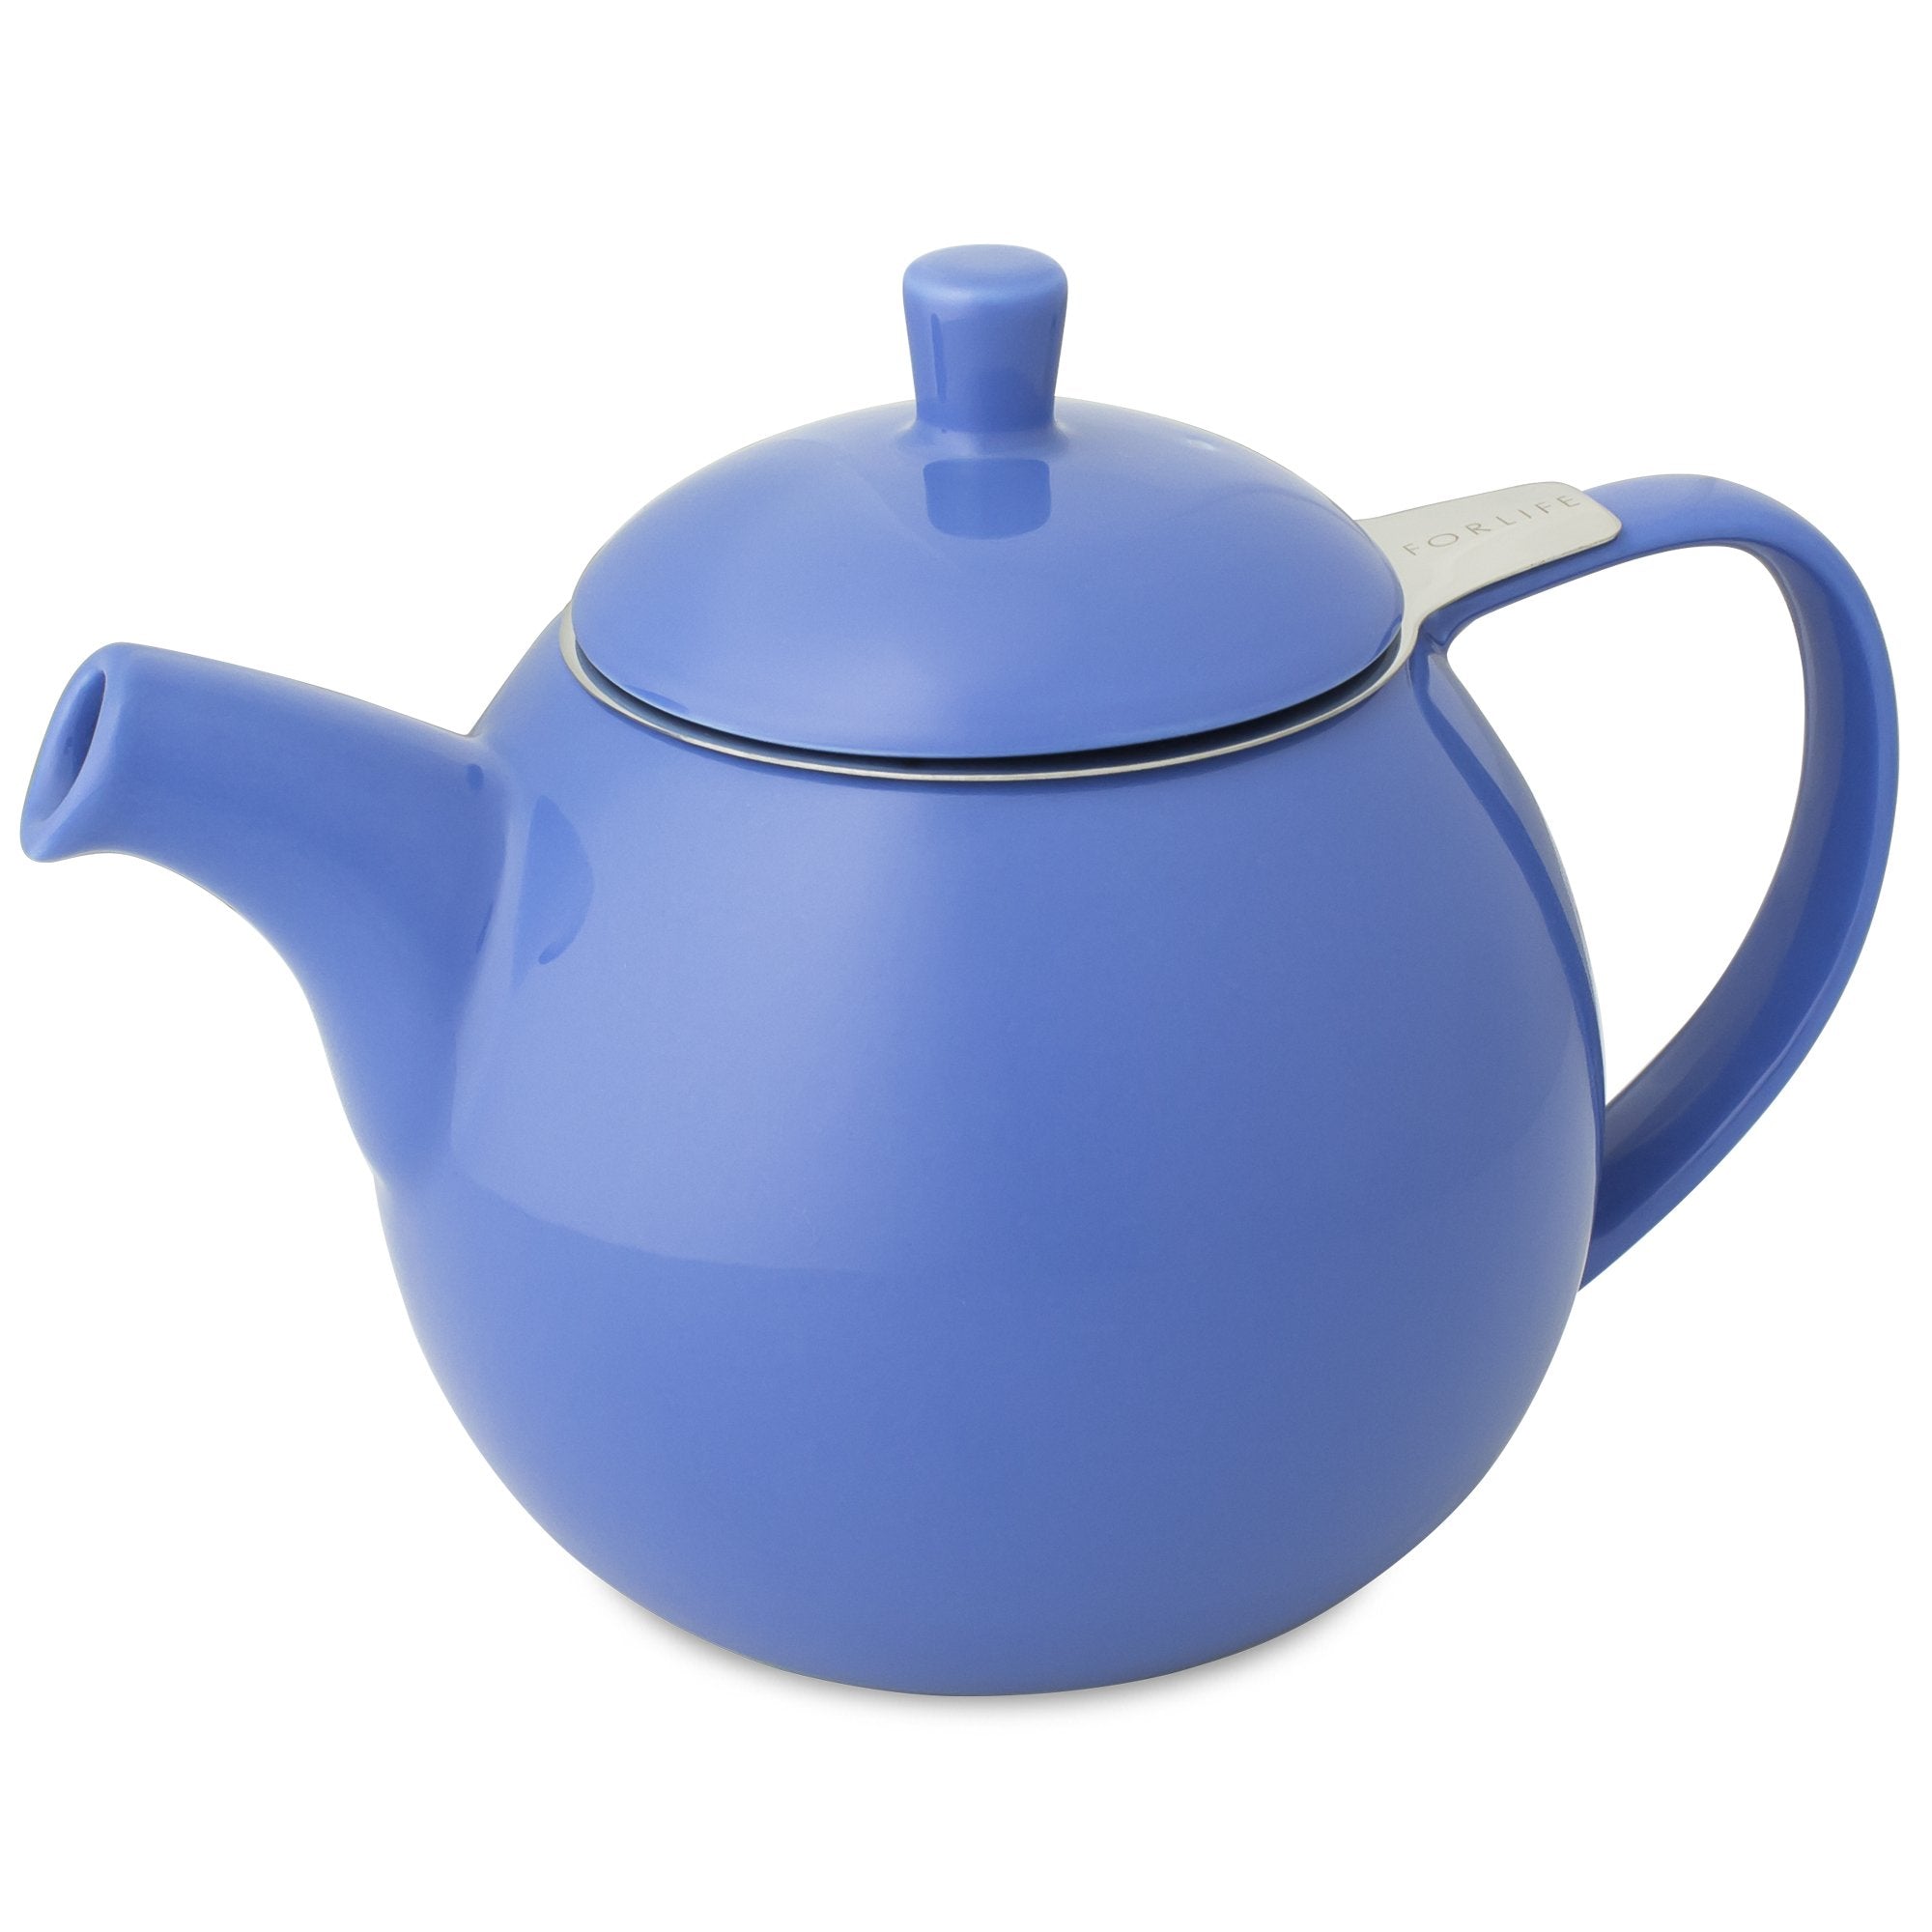 TeaLula 24 oz Curve sphere blue Teapot glossy surface finish and attached blue lid